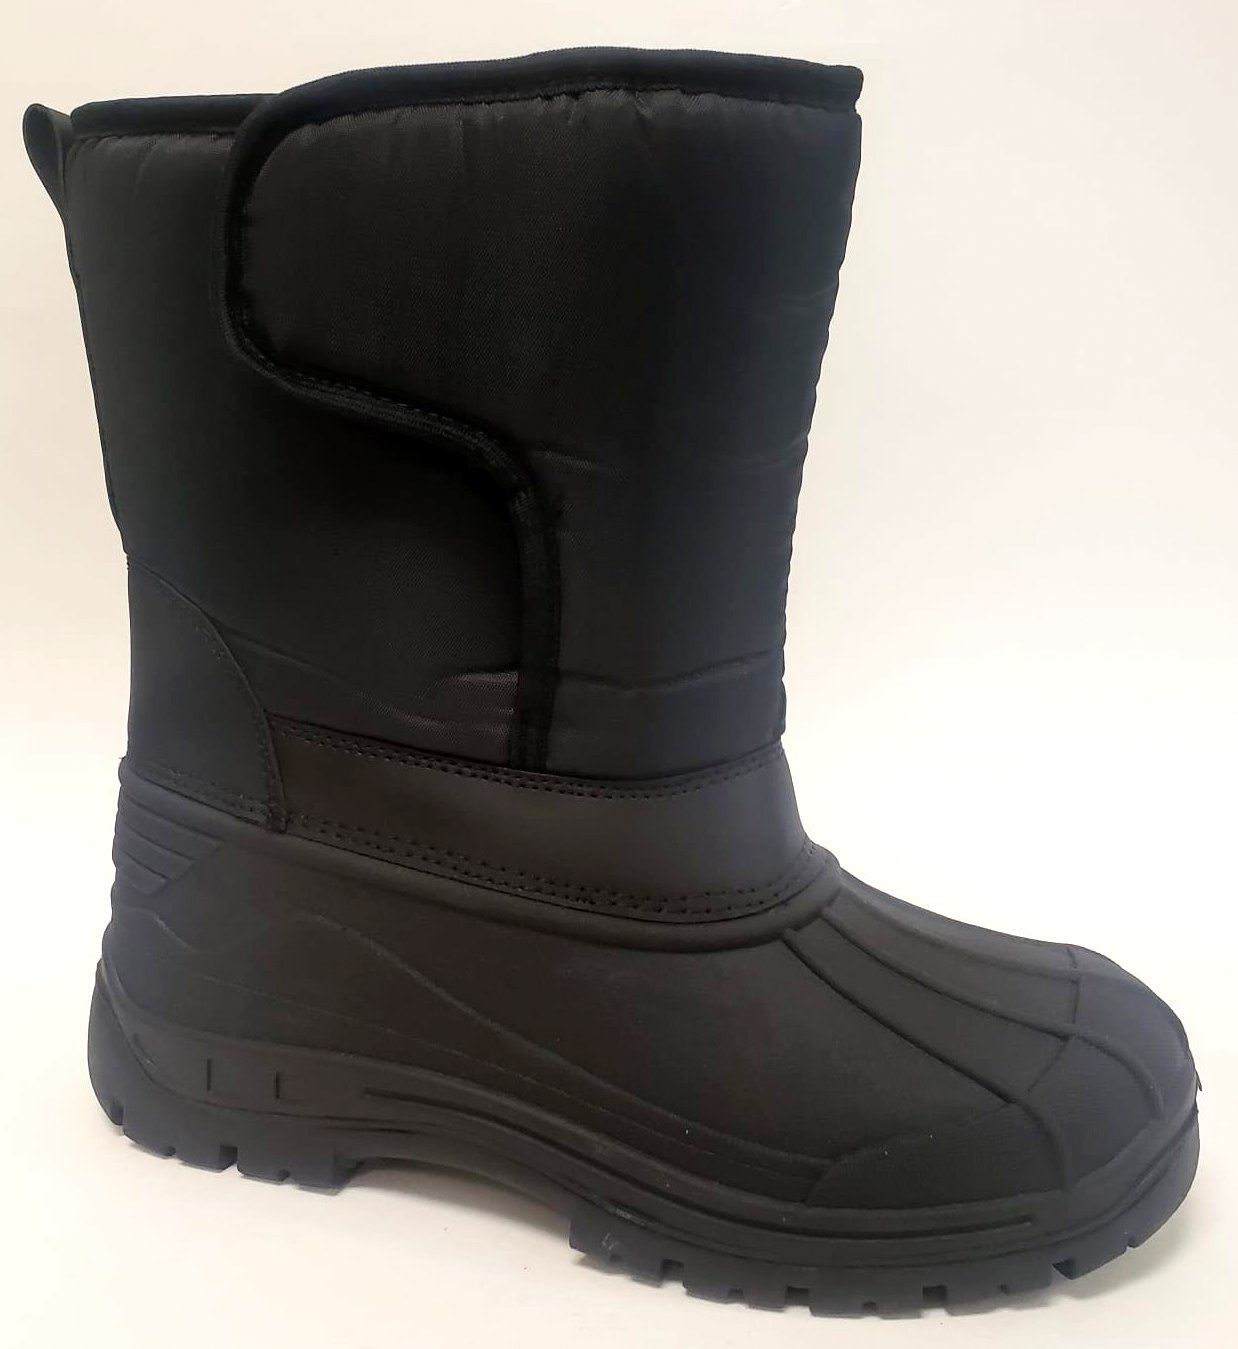 Snow boots kids sizes boy and girl 11,12,13,1,2,3,4 kids sizes